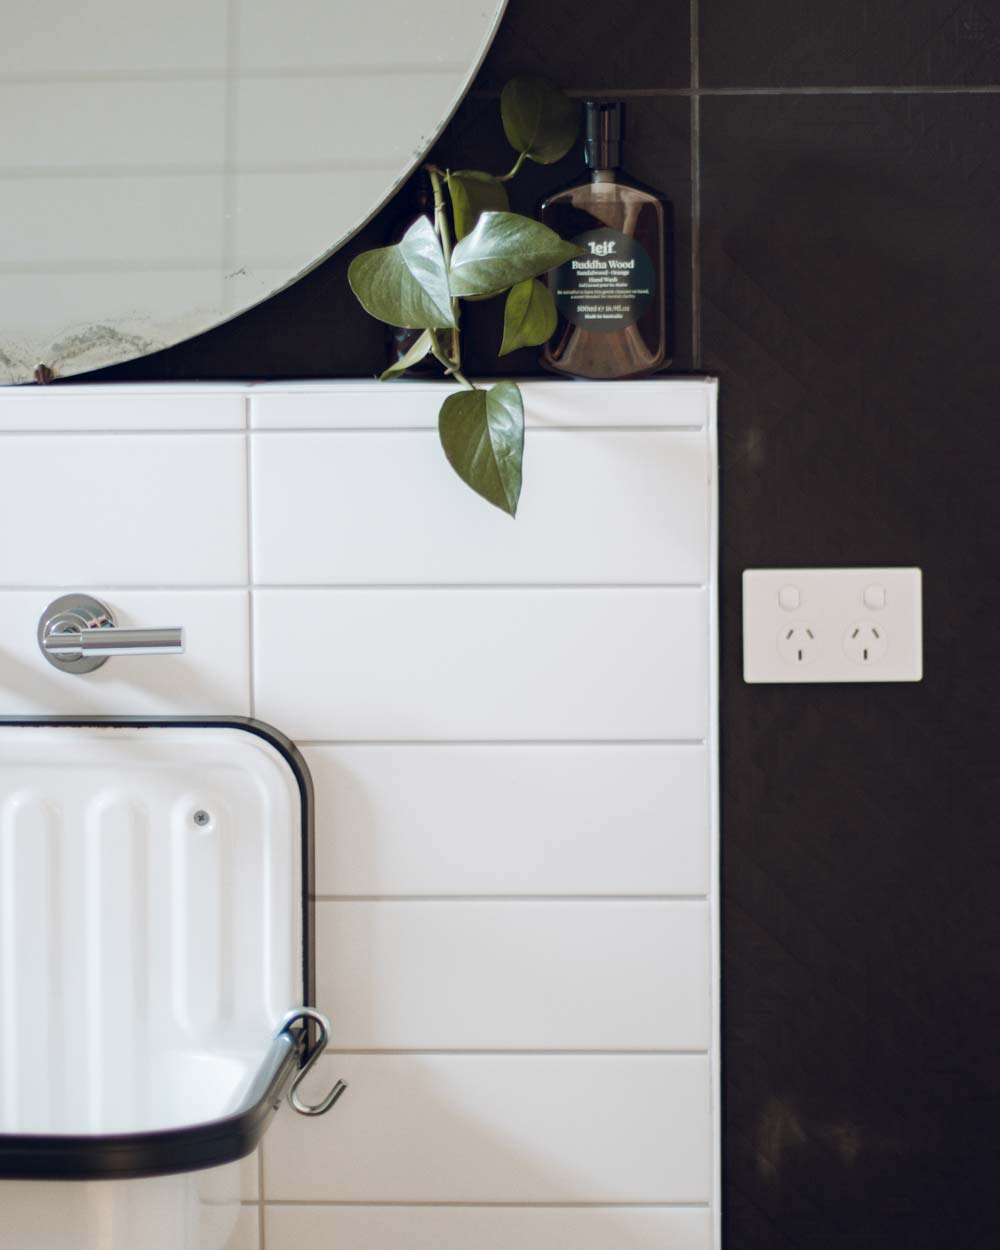 Bathroom details in the Slow Drift